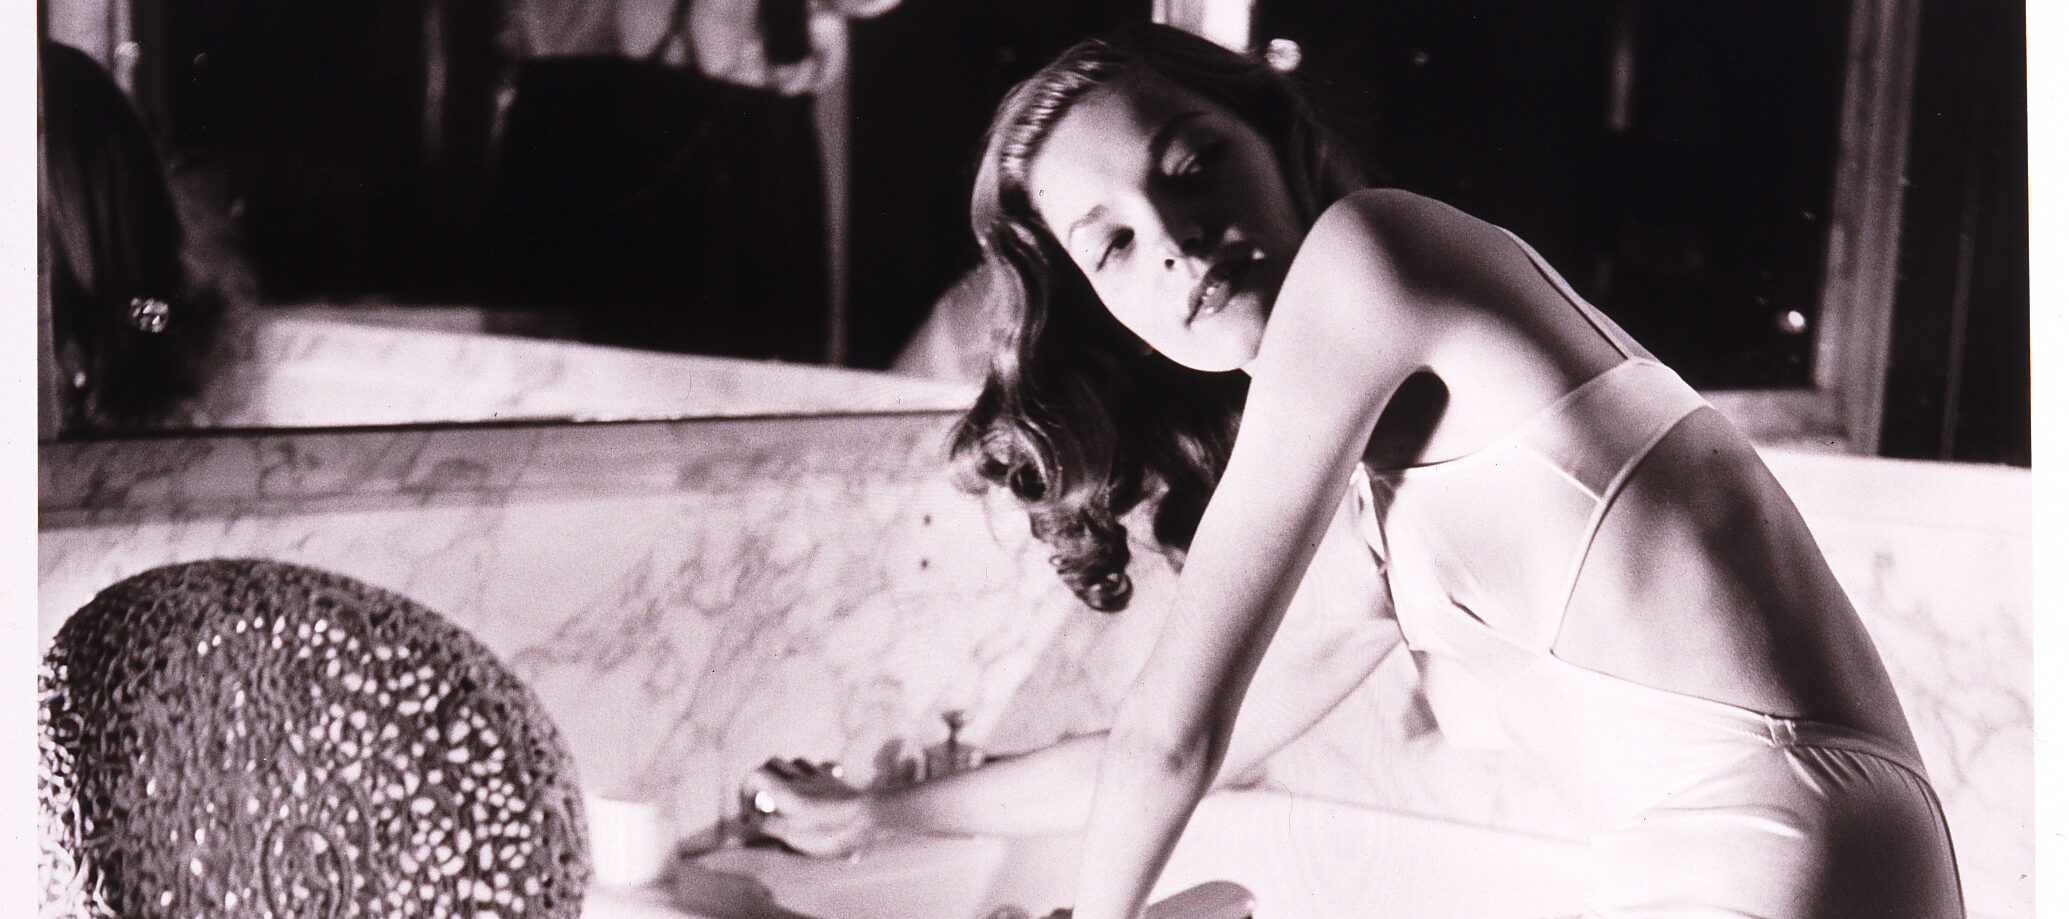 Louise Dahl-Wolfe, <em>Lauren Bacall in Helena Rubinstein's Bathroom</em>, 1943; Gelatin silver print, 14 x 11 in.; National Museum of Women in the Arts, Gift of Helen Cumming Ziegler; Photograph by Louise Dahl-Wolfe © 1989 Center for Creative Photography, Arizona Board of Regents